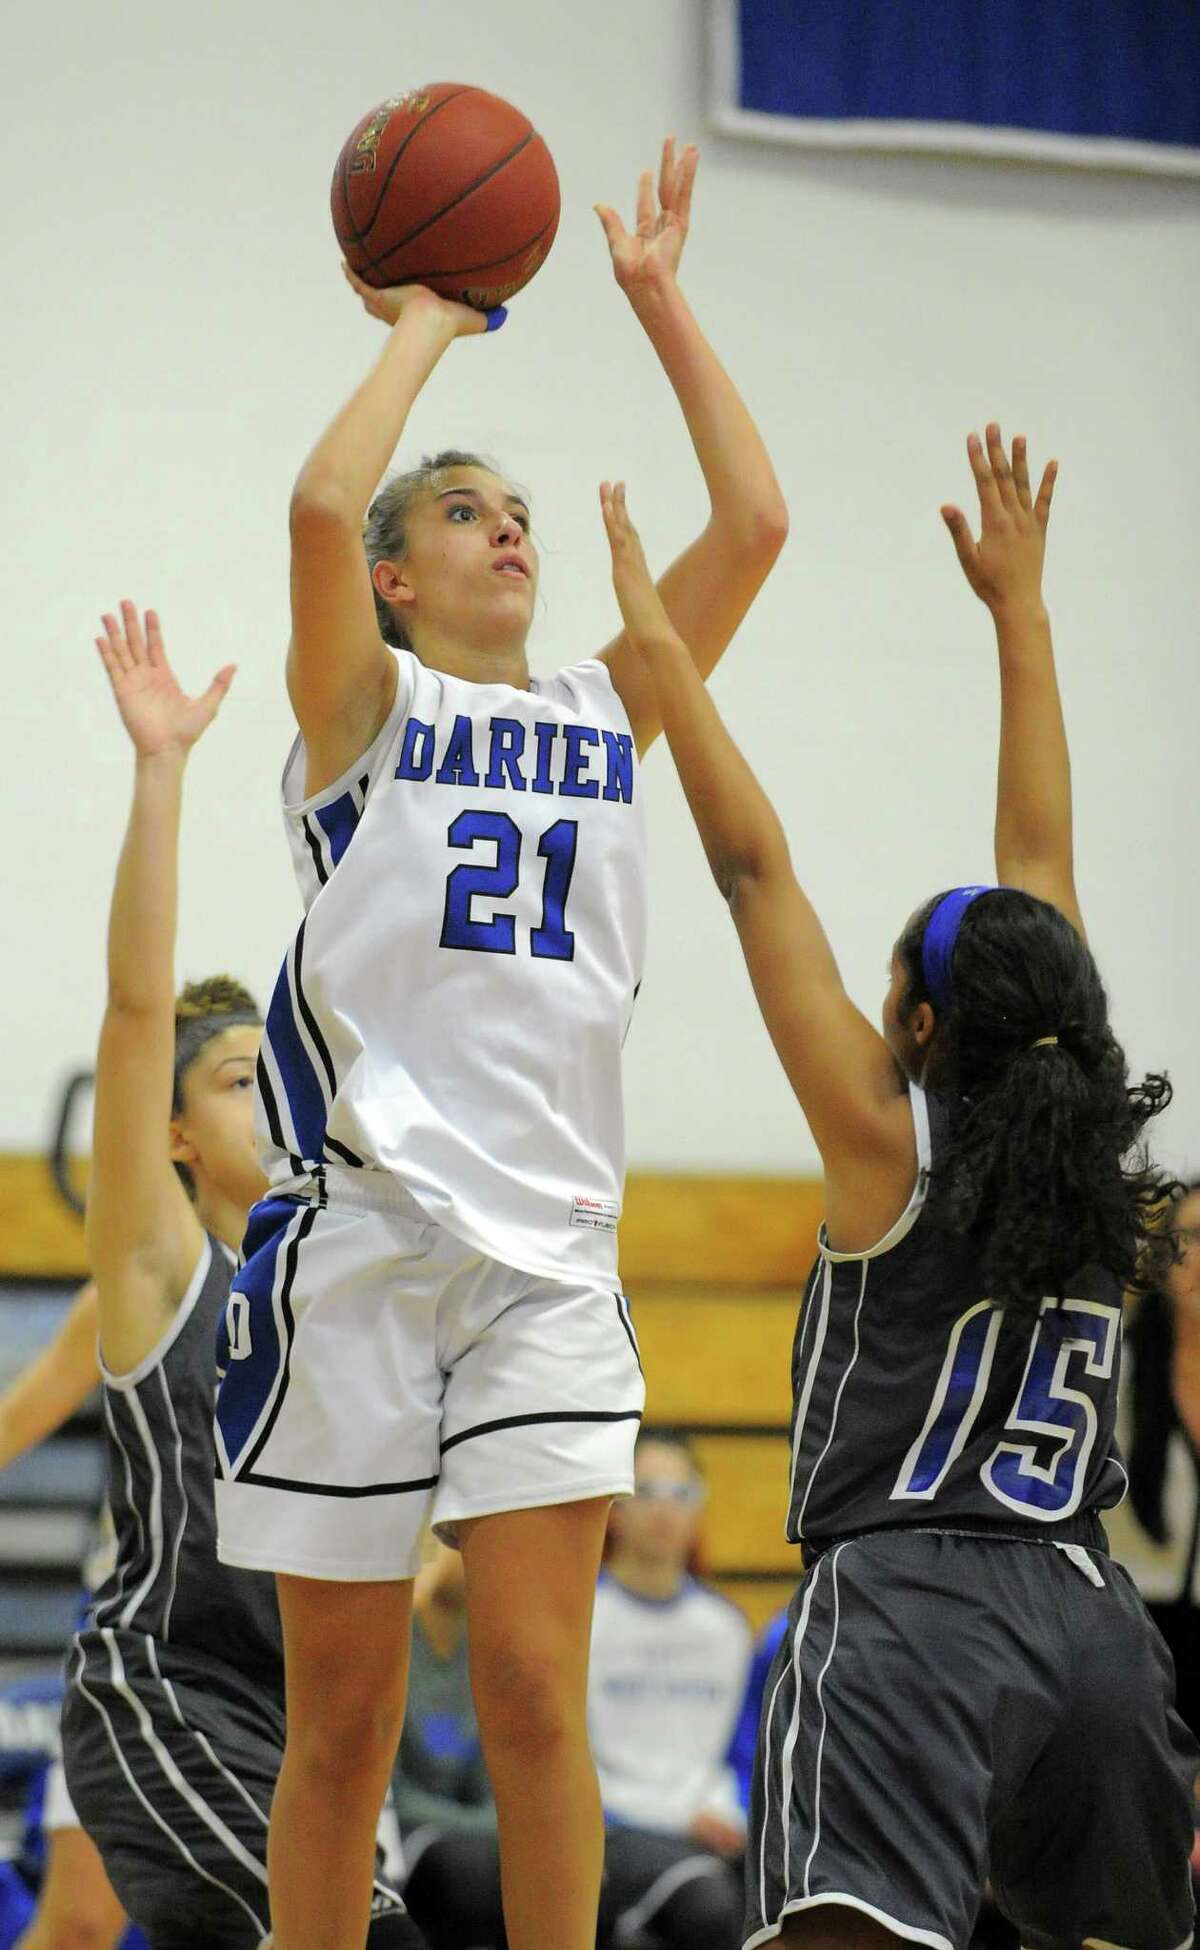 Darien’s Christine Fiore (21) puts up a shot over West Haven’s Lauren Lewis (15) in a CIAC Class LL girls basketball state qualifier at Darien High School on Friday.